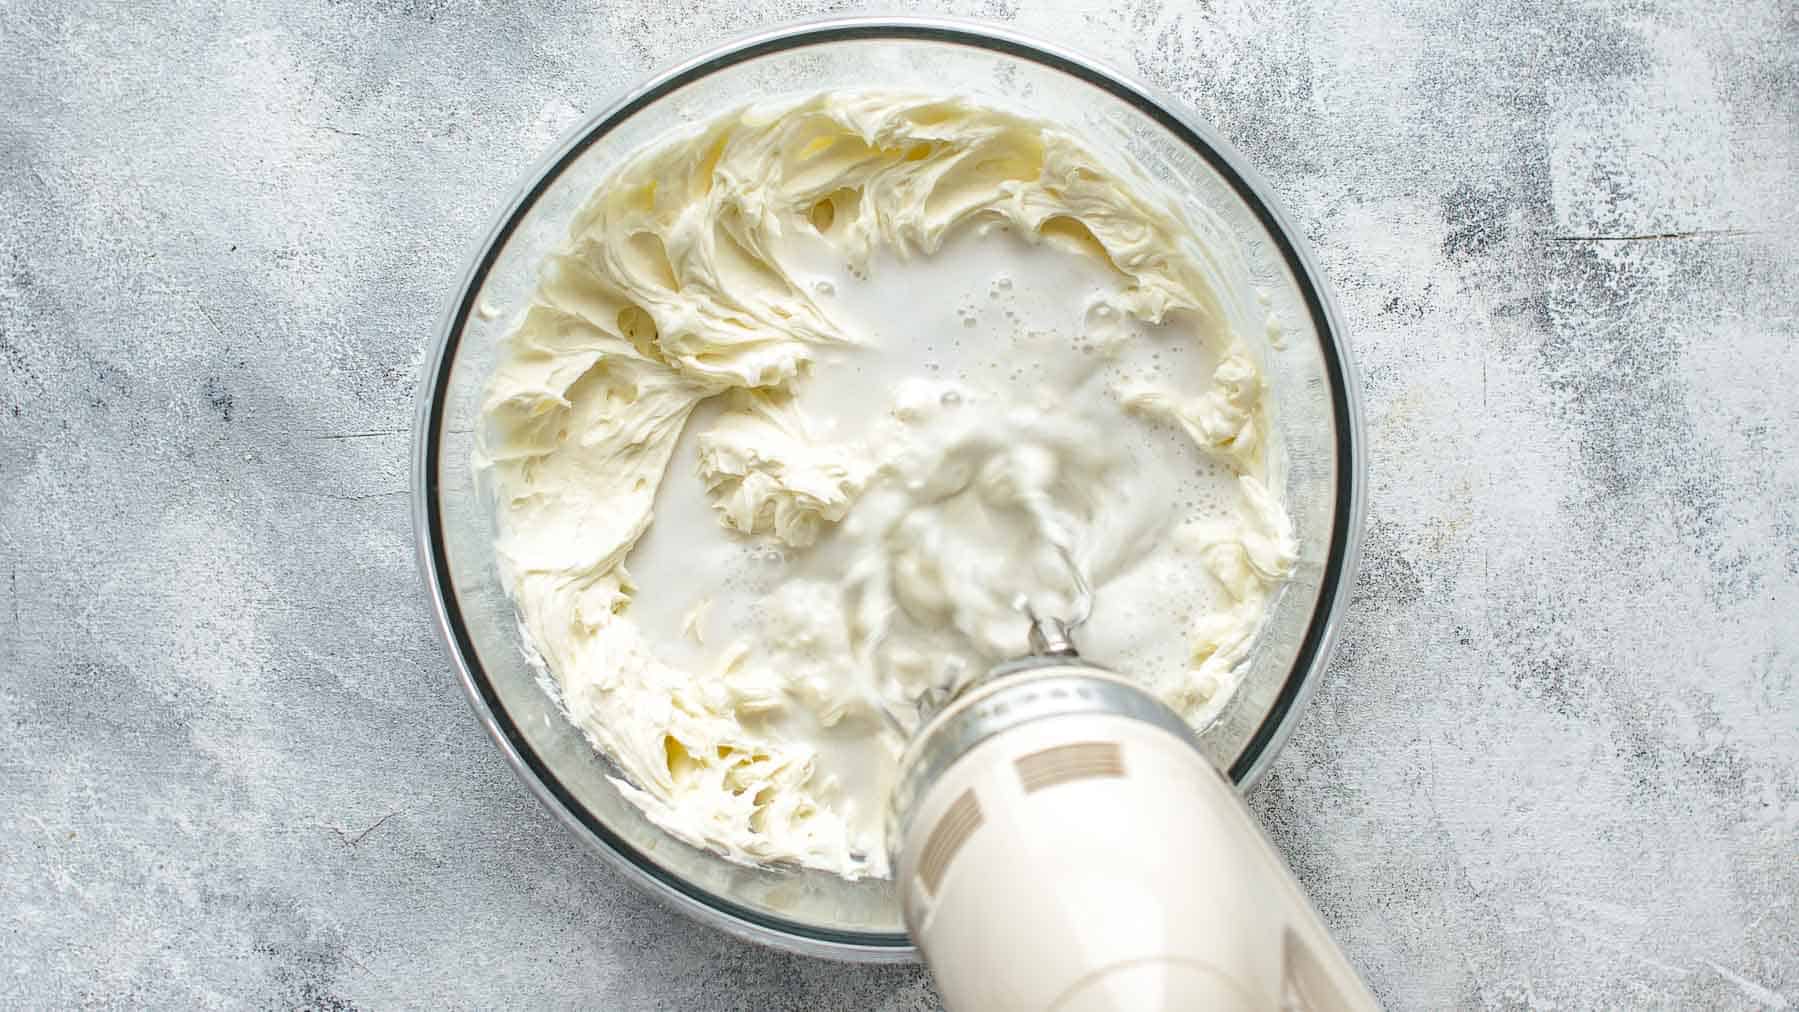 Adding the coconut milk and the vinegar to the coconut cheesecake batter